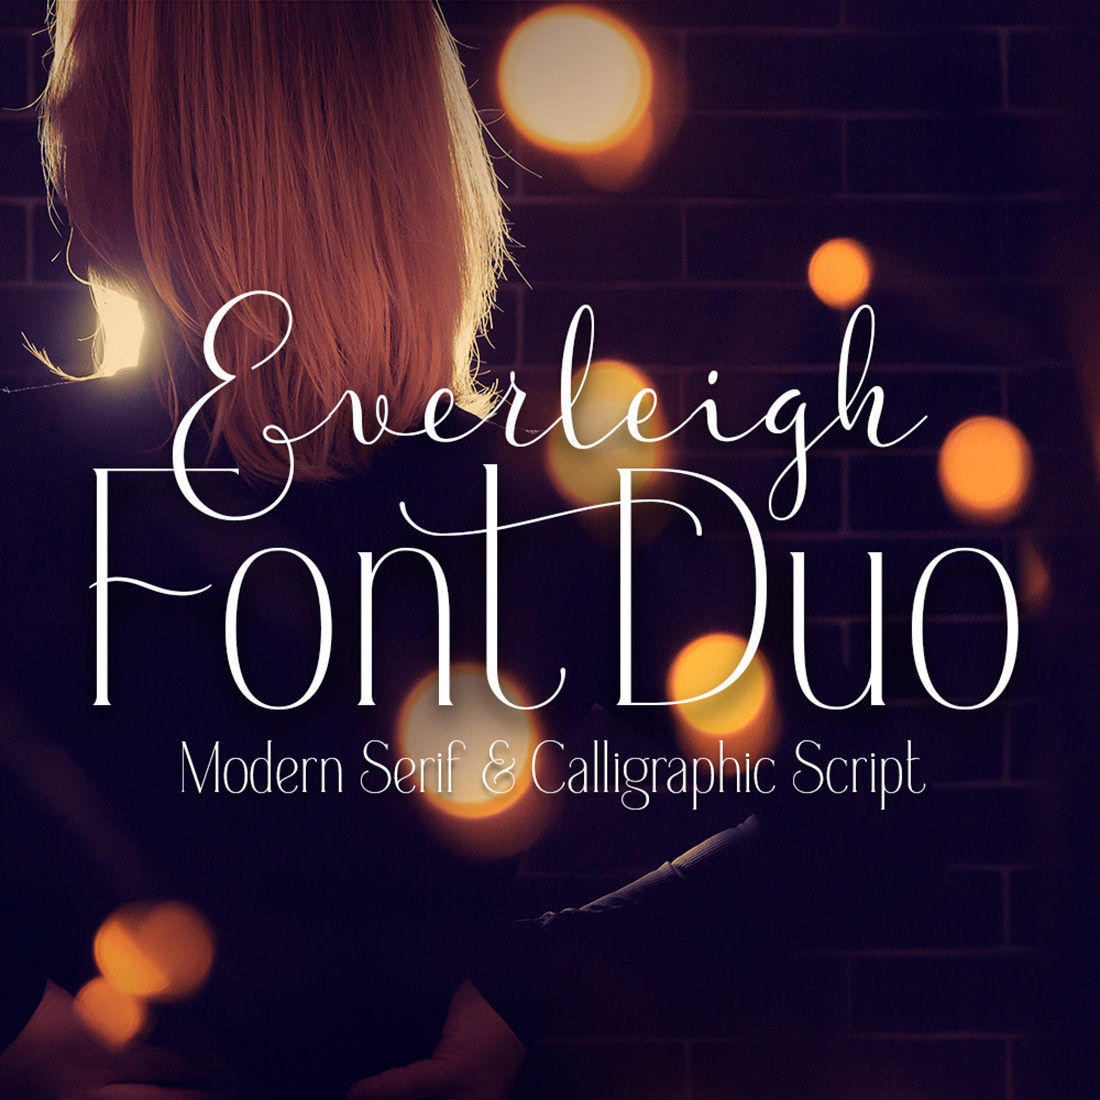 Everleigh Font Duo cover image.